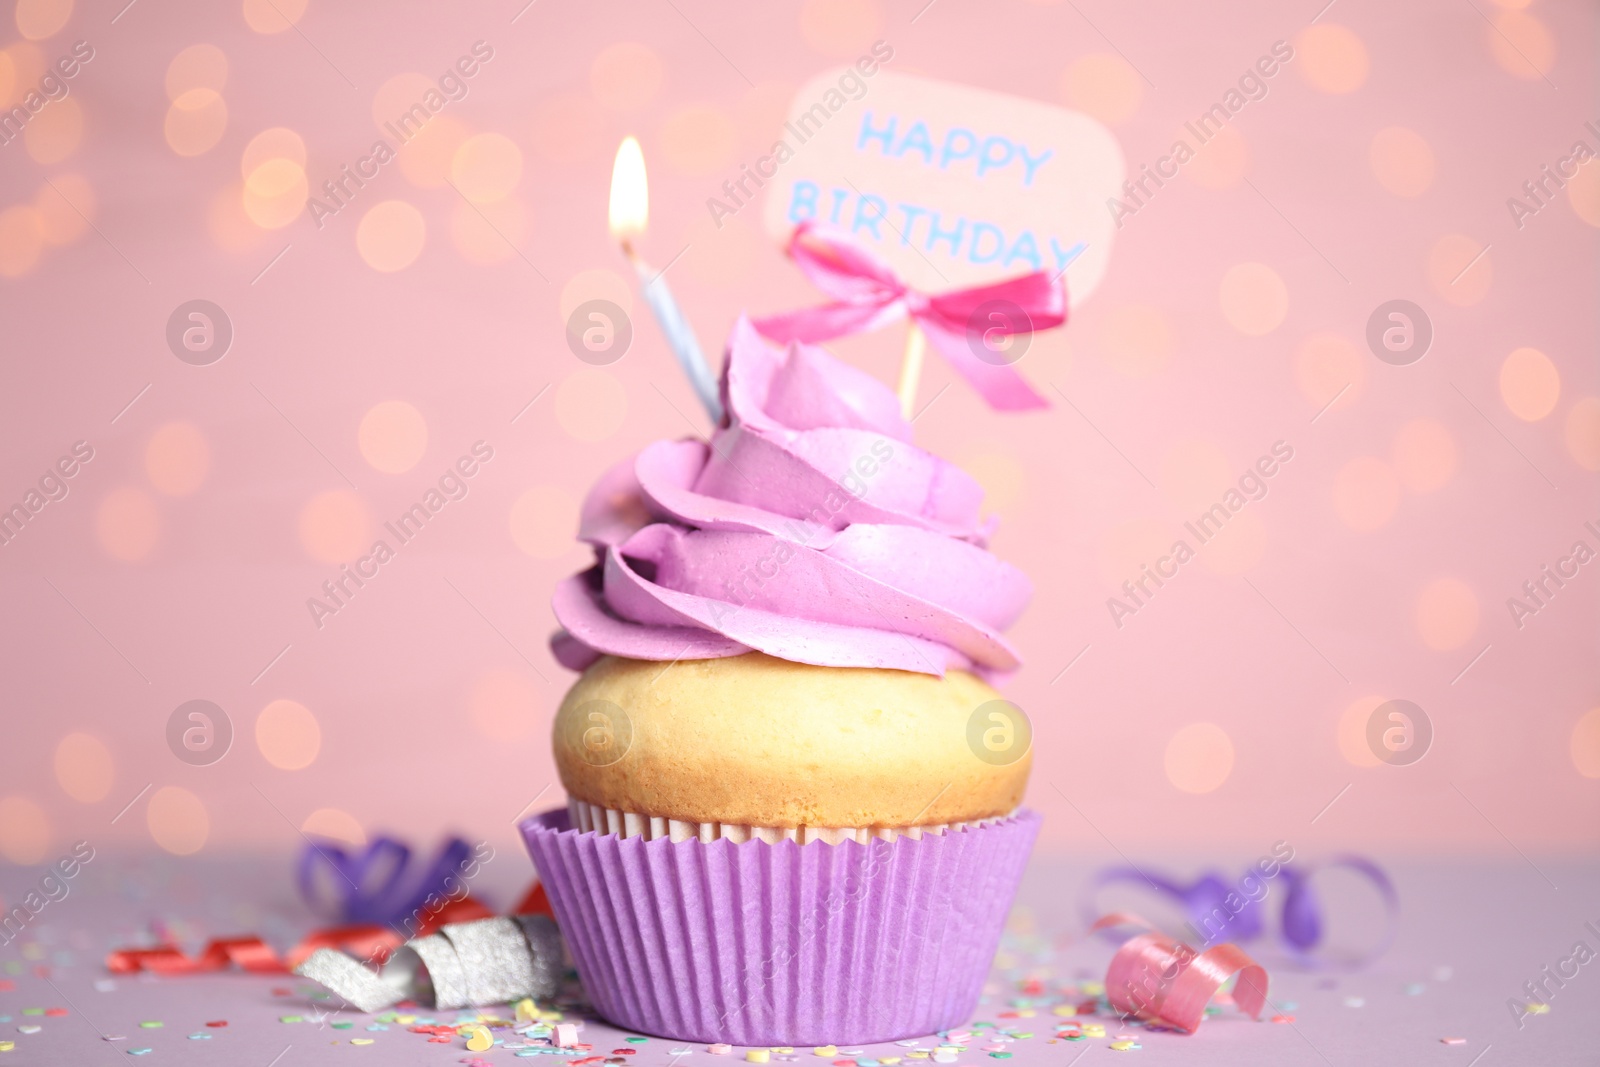 Photo of Beautiful birthday cupcake, streamers and confetti against pink background with blurred lights